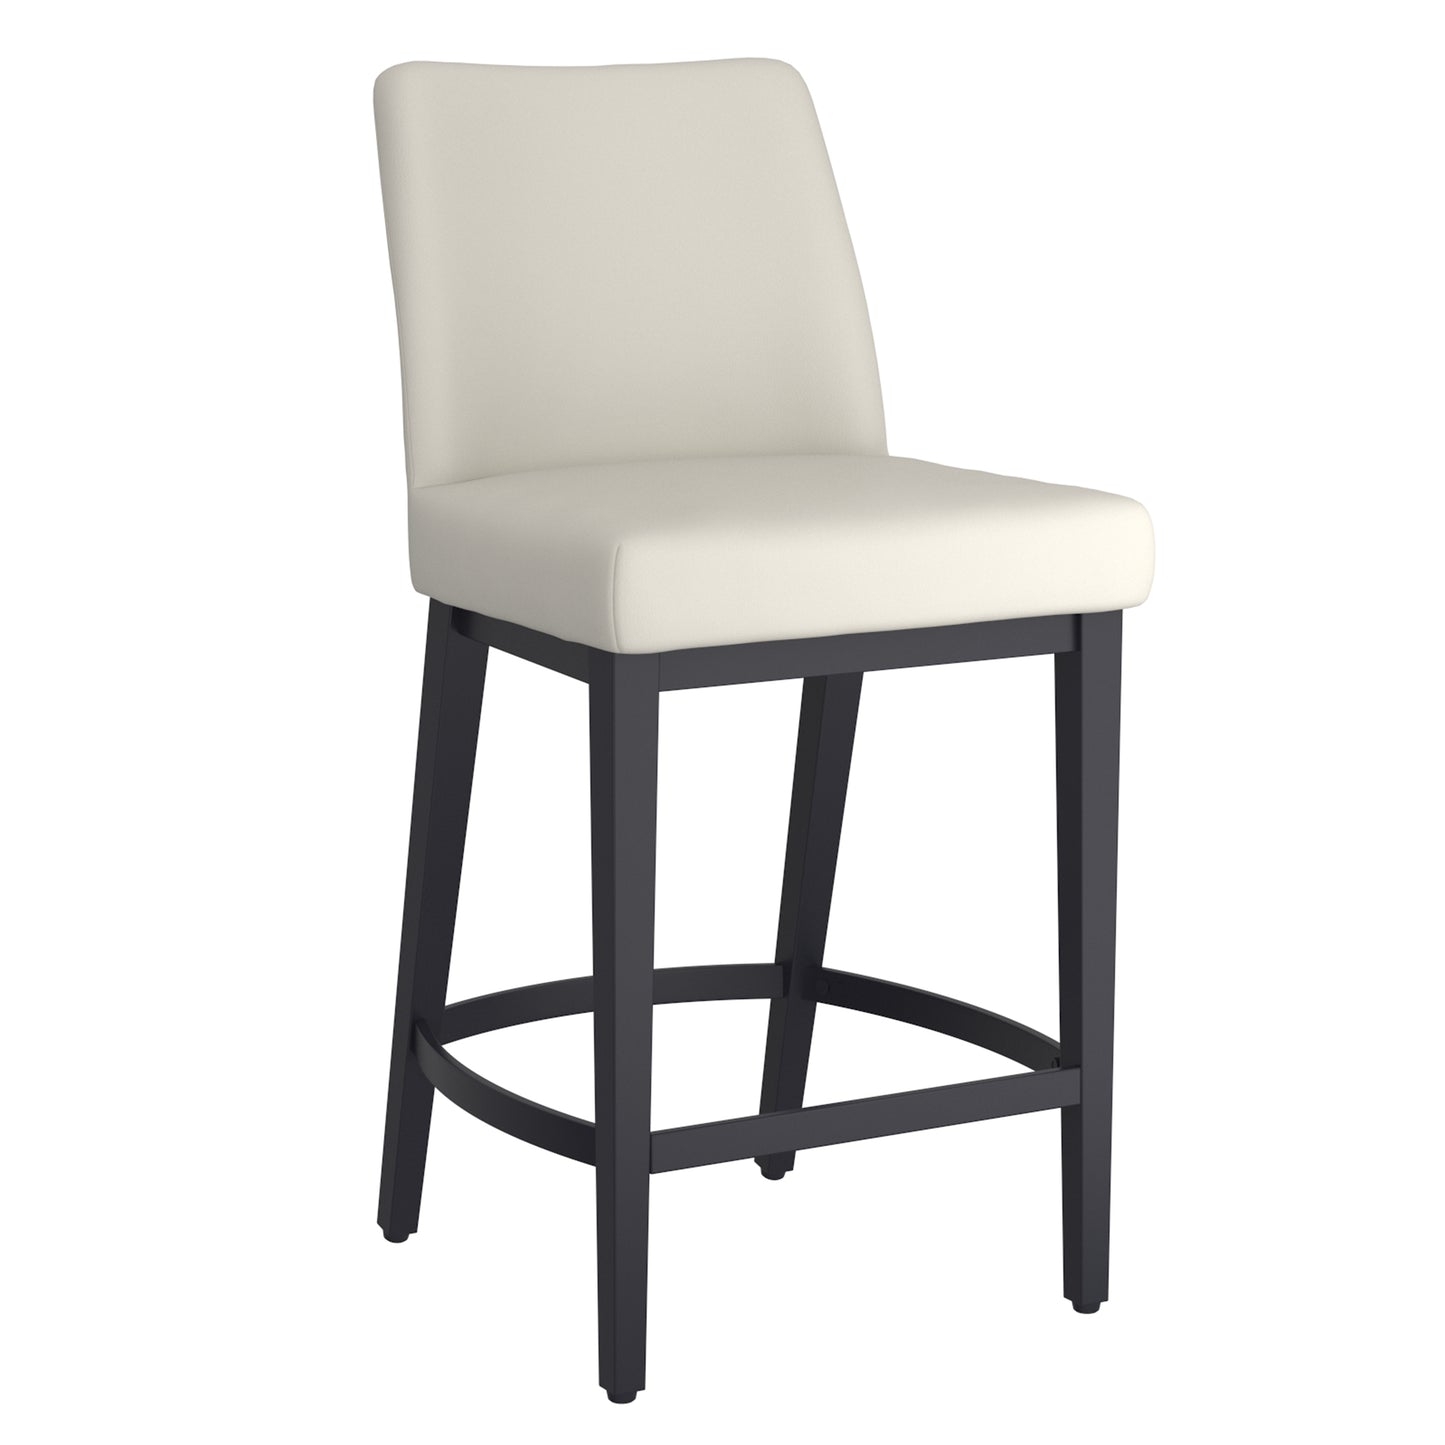 Jace 26" Counter Stool, Set of 2, in Beige Faux Leather and Black